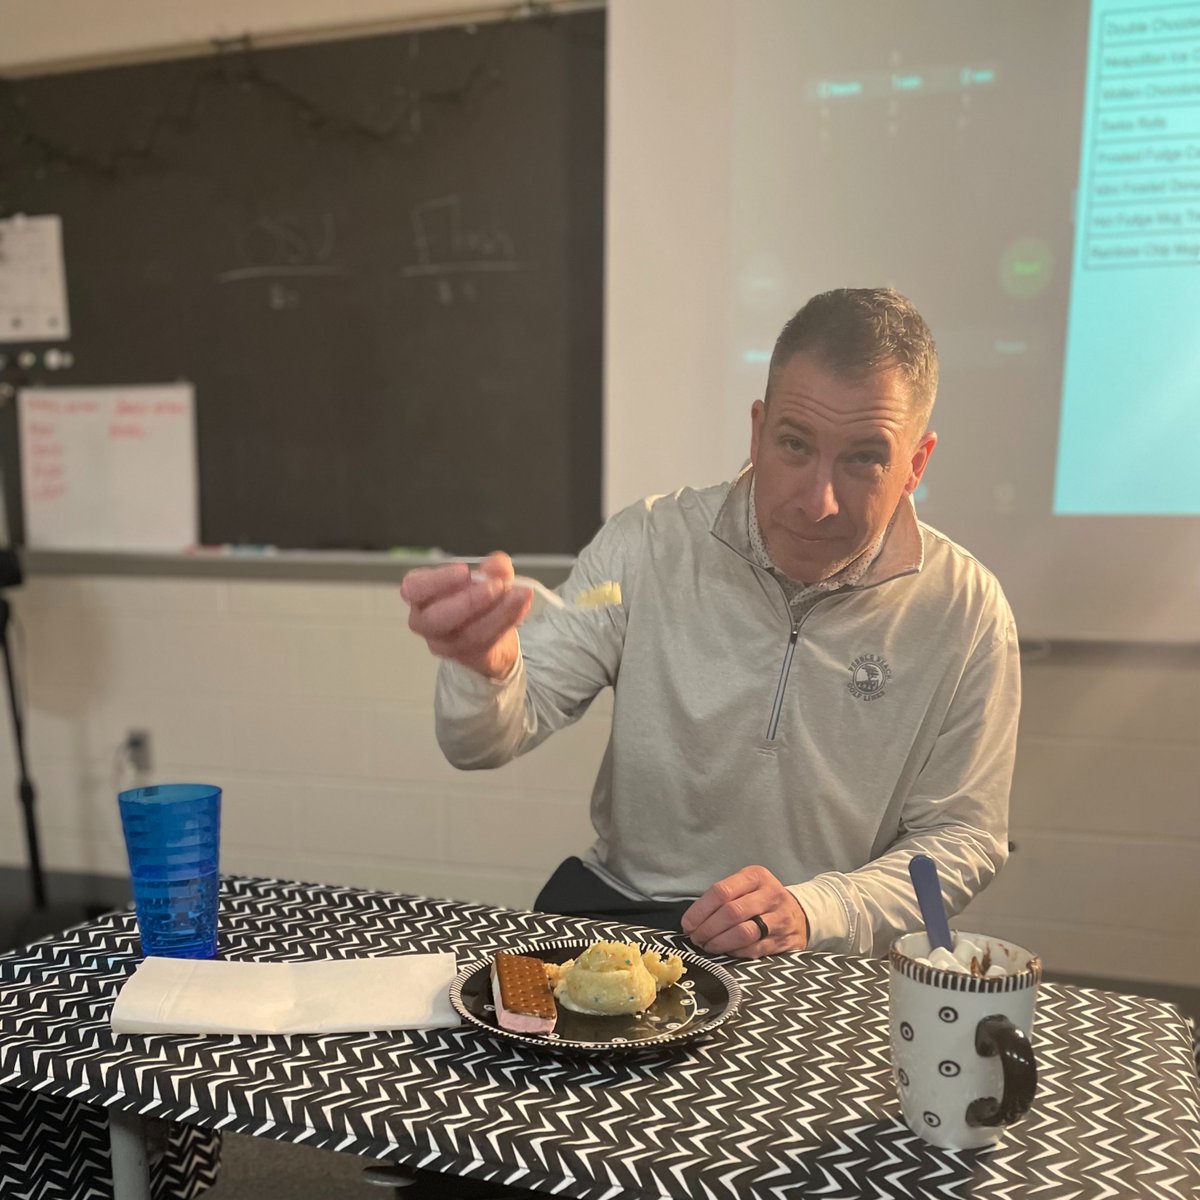 Our 2nd period class, in collaboration with @Zustin18 class, has had the great fortune of welcoming some fantastic Celebrity Taste Testers over the last three weeks. 

@HudsExplorerSup, Gordon Ramsay is out of town next week. Know anyone with a refined palate who can step in? https://t.co/P05QDvu9qi